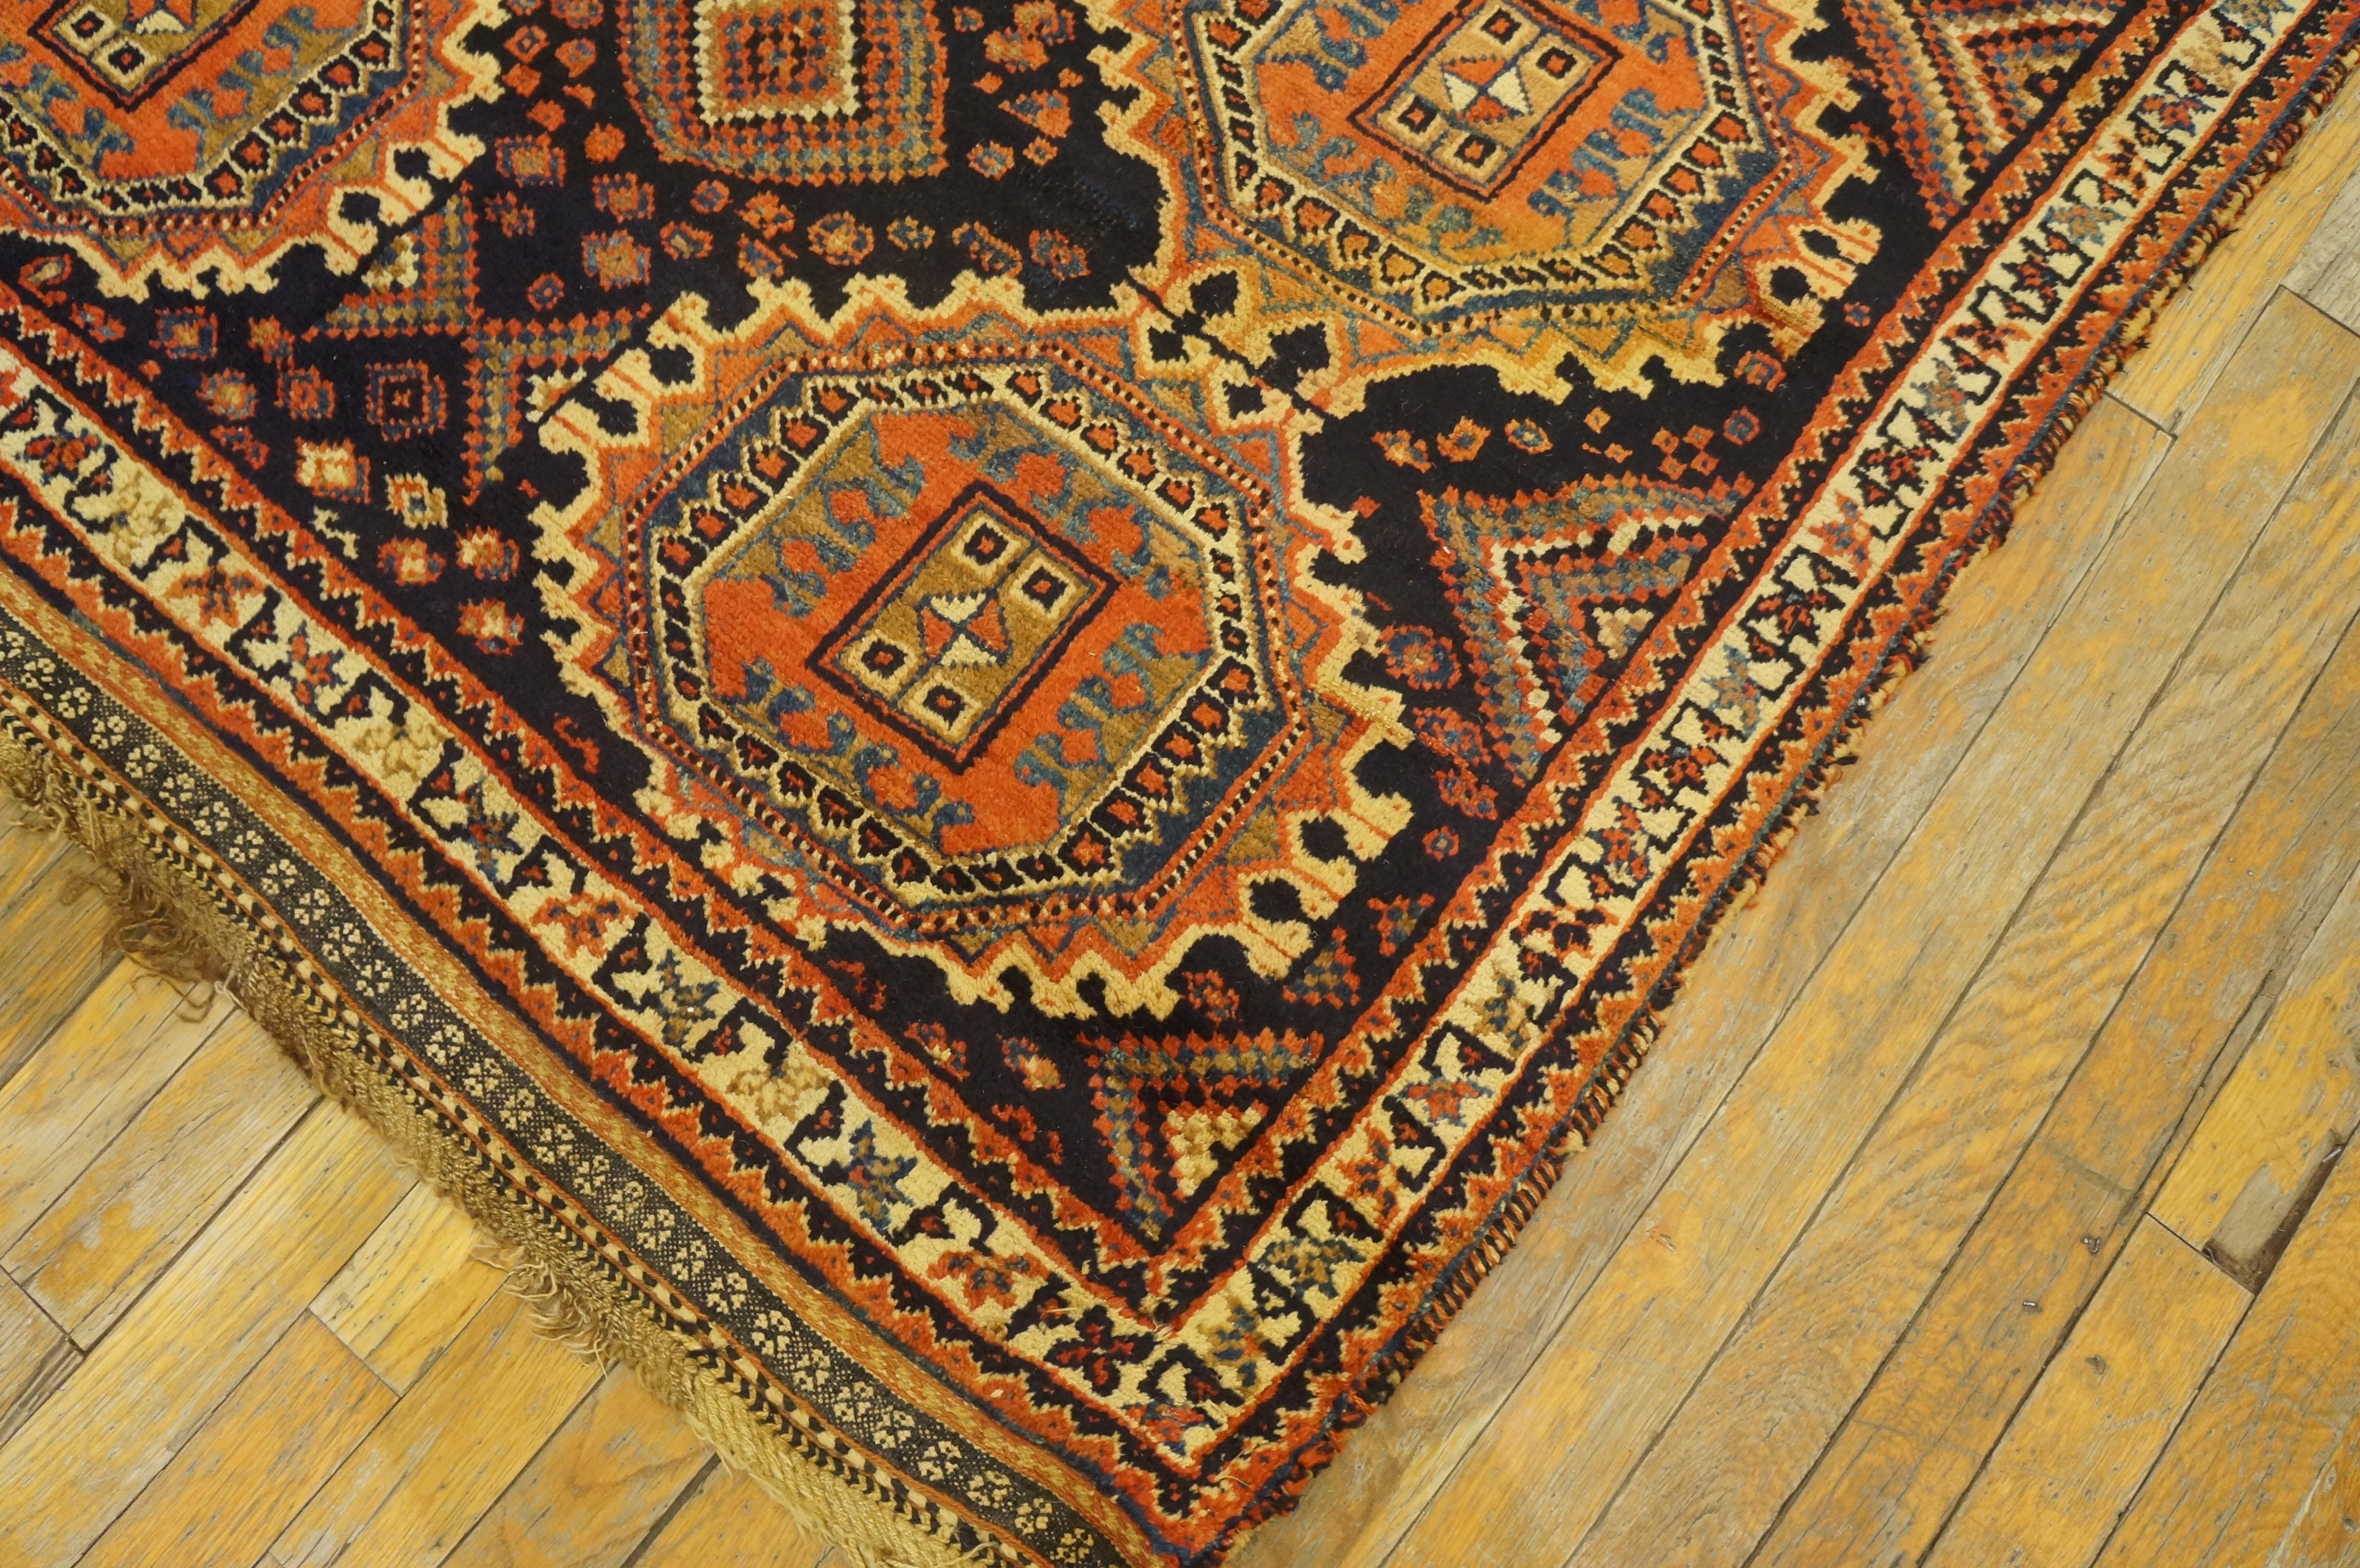 Early 20th Century S.E. Persian Afshar Carpet ( 4'6